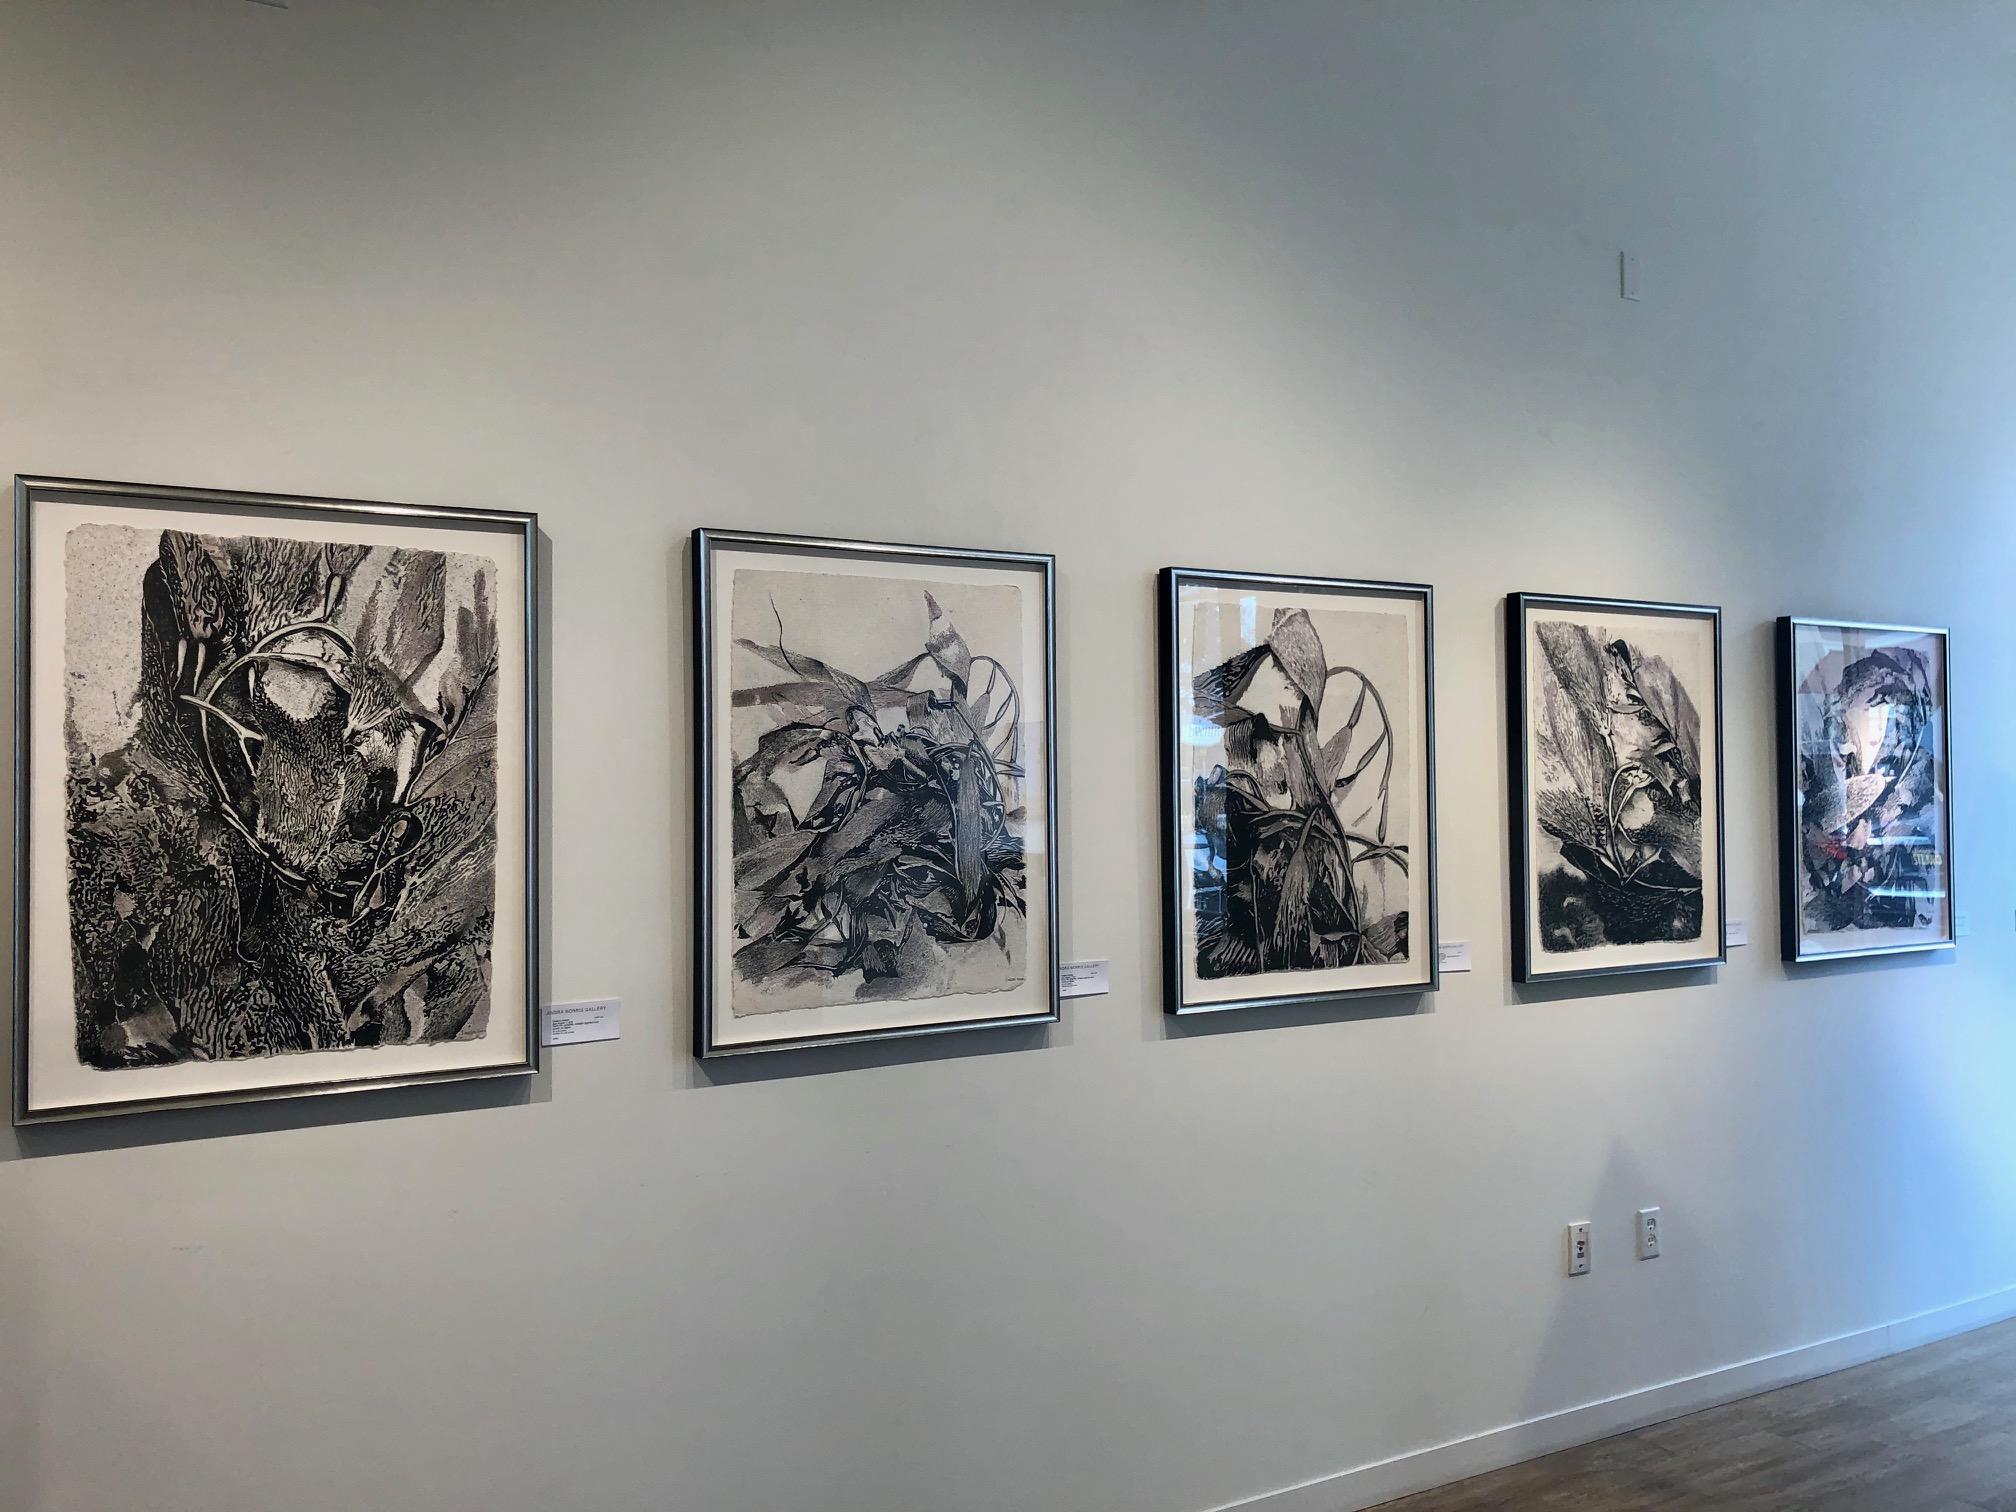 Original work of art that utilizes both painting and drawing - Mixed-media: Sumi Ink, graphite, metallic pigment and acrylic on Moulin de Larroque paper, made by hand in a mill in France. The mixed media work is inspired by seaweed / kelp at a